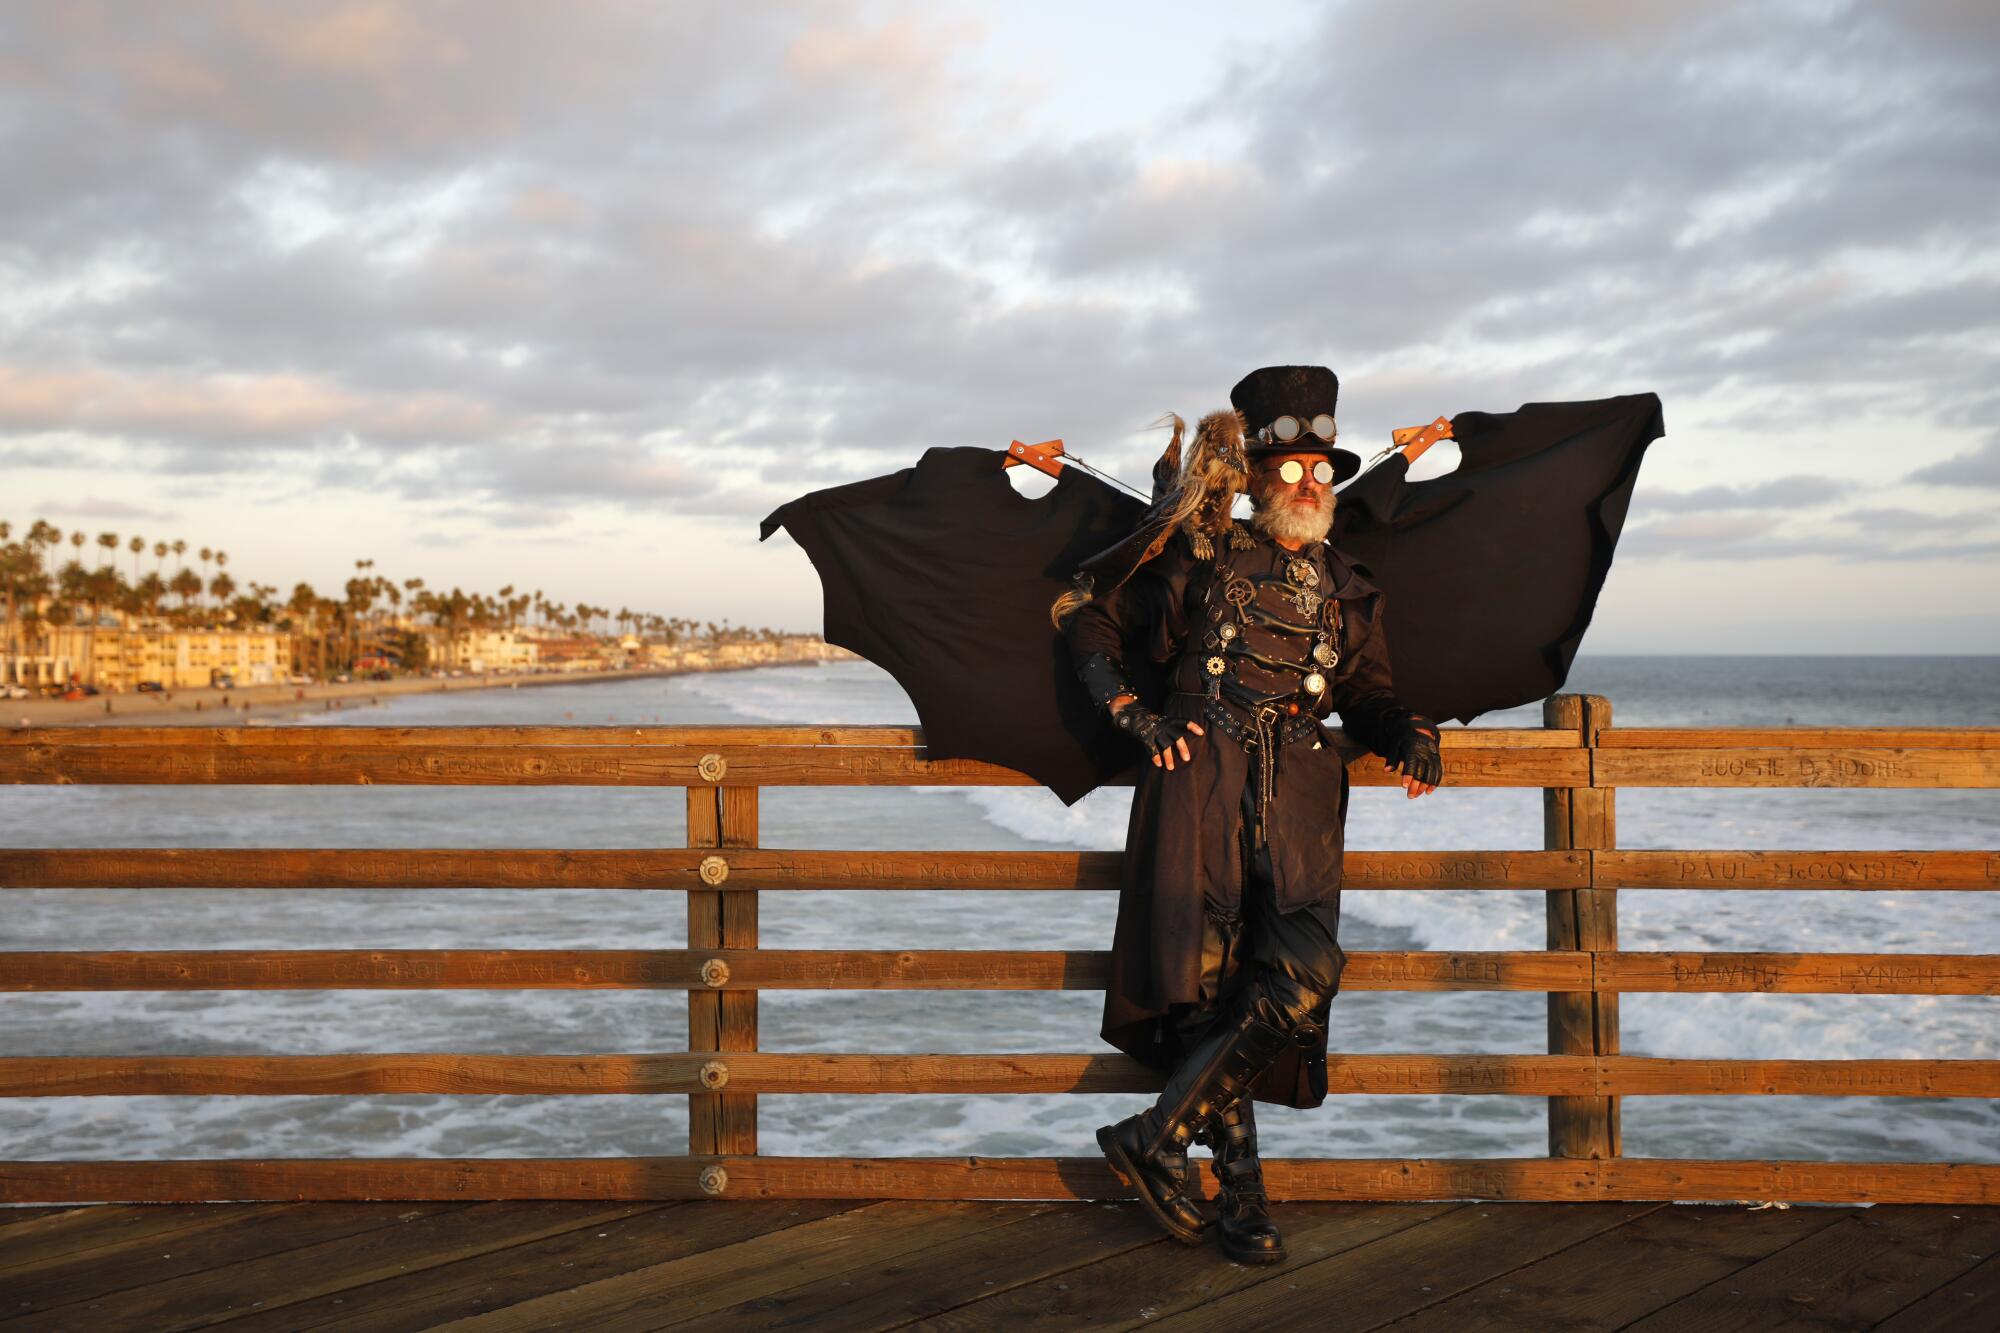 Dean LeCrone dressed as Dr. Artemus Peepers, a steampunk hero, at the Oceanside Pier. 